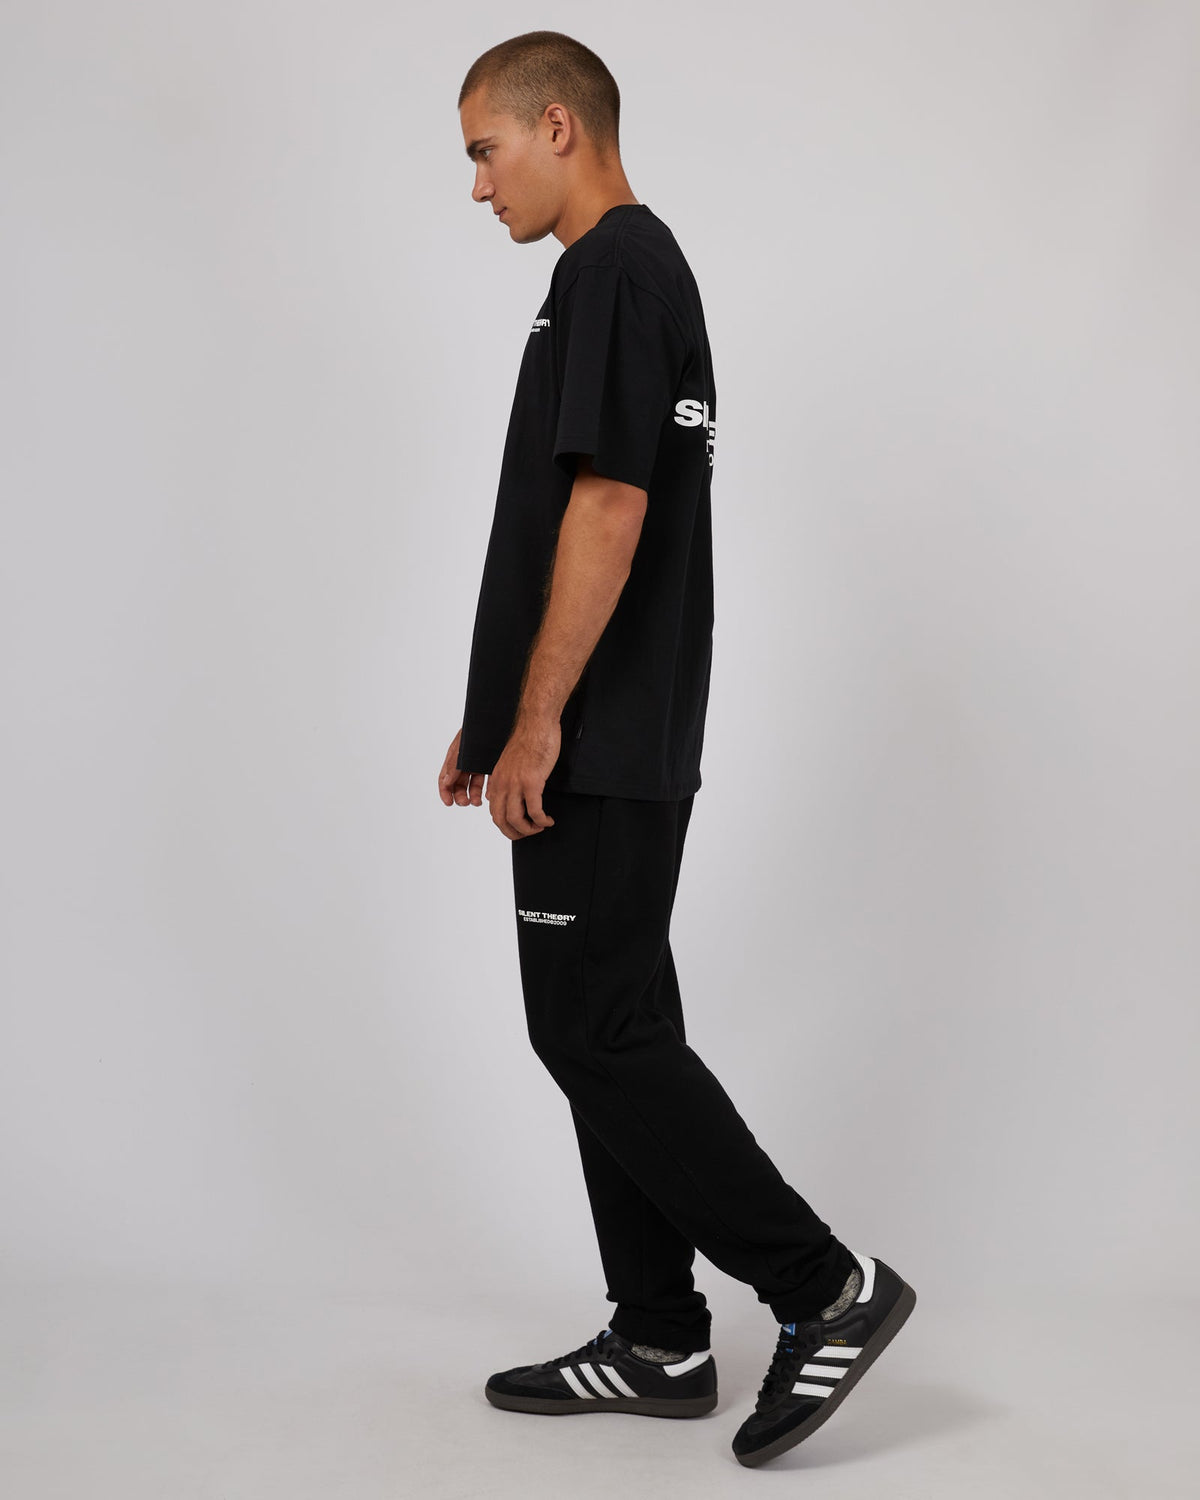 Silent Theory-Essential Theory Tee Black-Edge Clothing